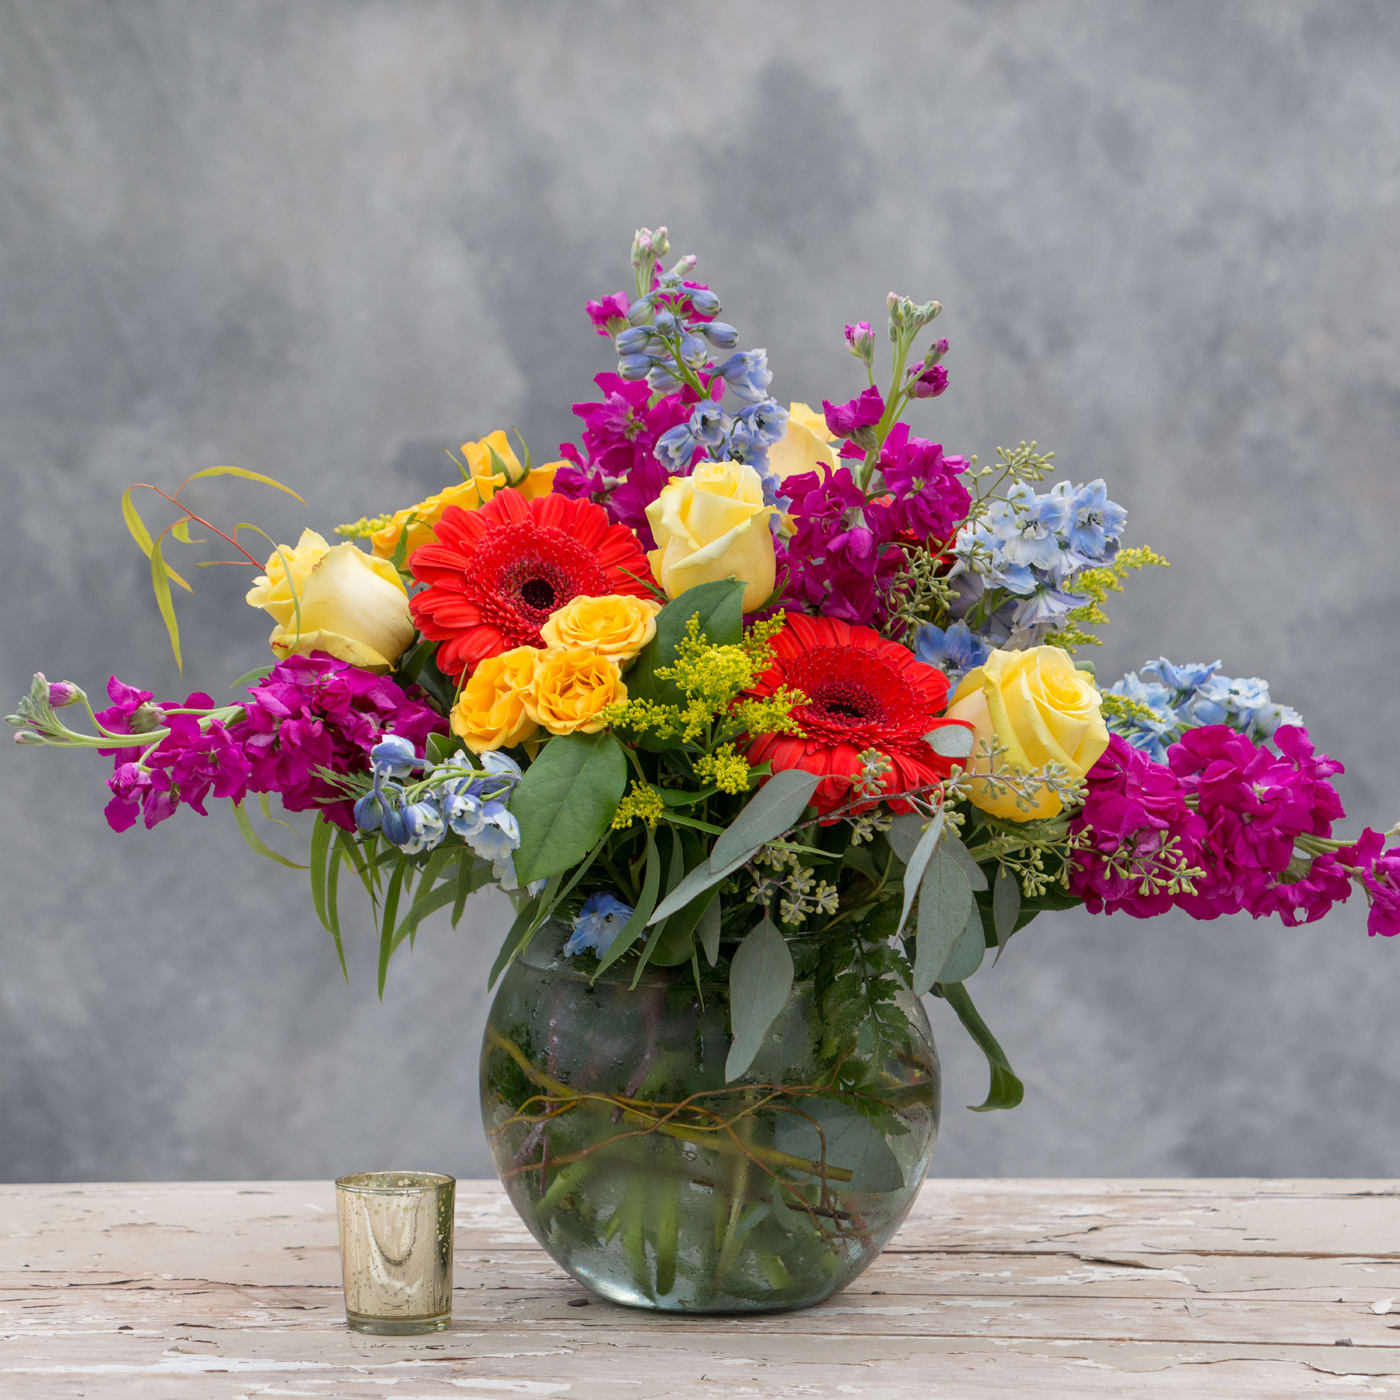 Garden Party - Bring your Garden Party indoors with this grand bubble bowl vase overflowing with gerber daisies, yellow standard and spray roses, blue delphinium, fuchsia stock, salidago and premium greens.  An outstanding centerpiece for any table.